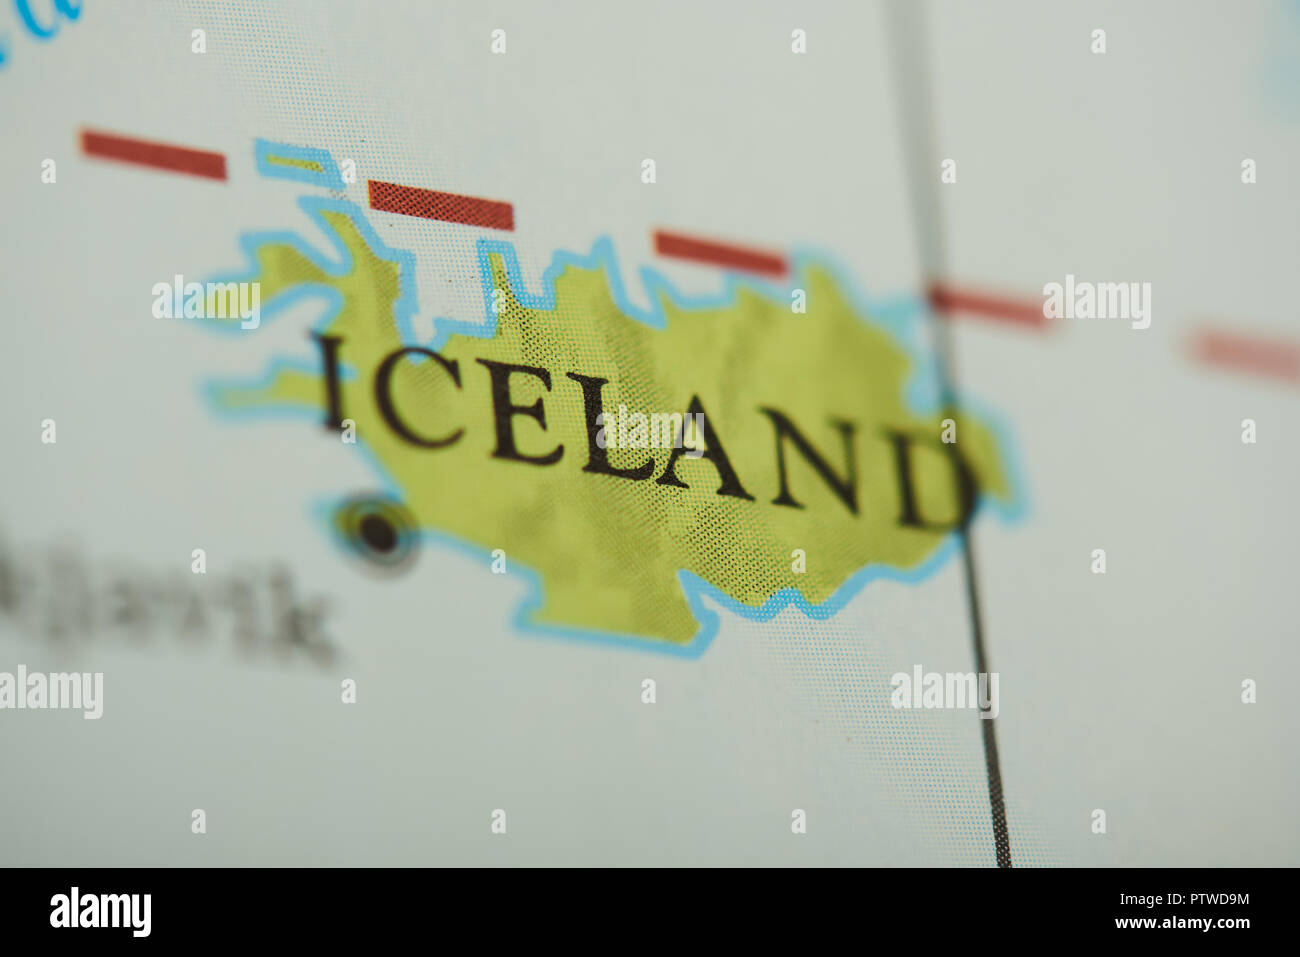 Iceland country on paper map close up view Stock Photo